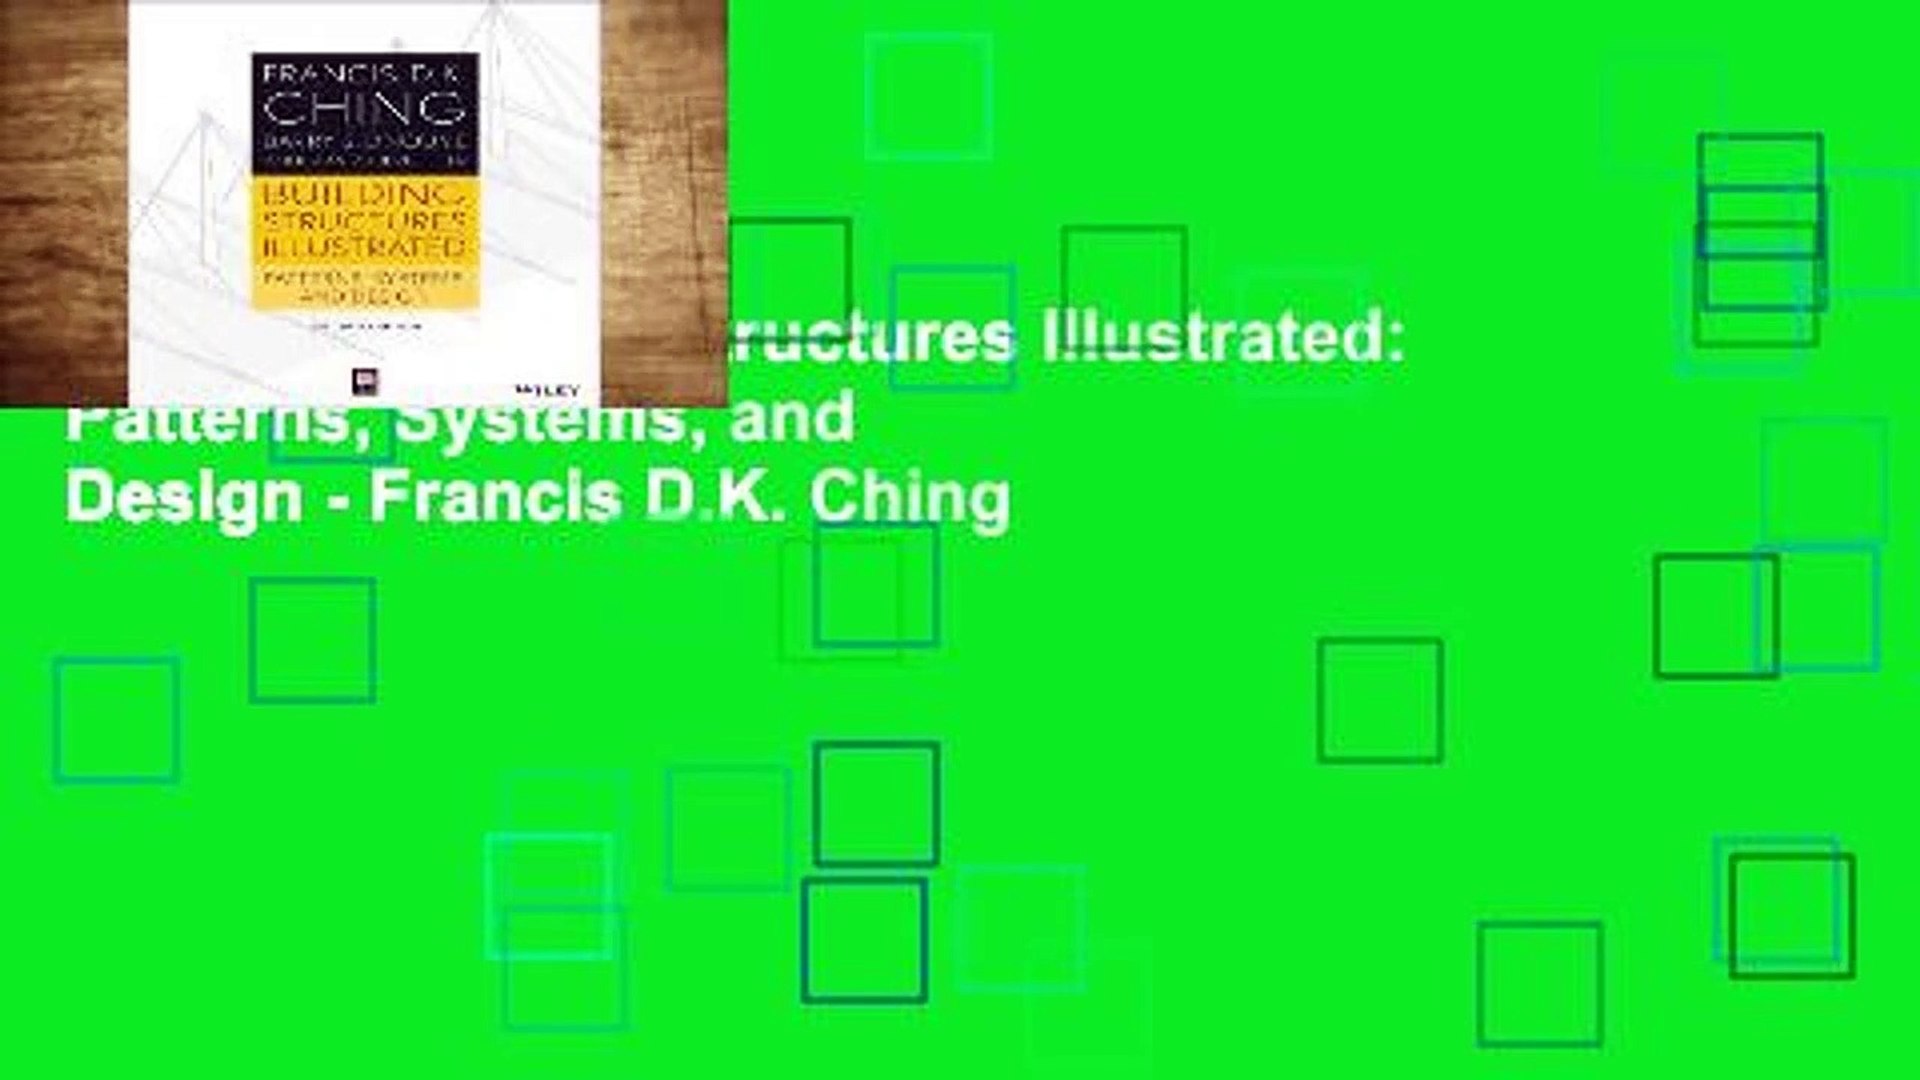 Review  Building Structures Illustrated: Patterns, Systems, and Design - Francis D.K. Ching